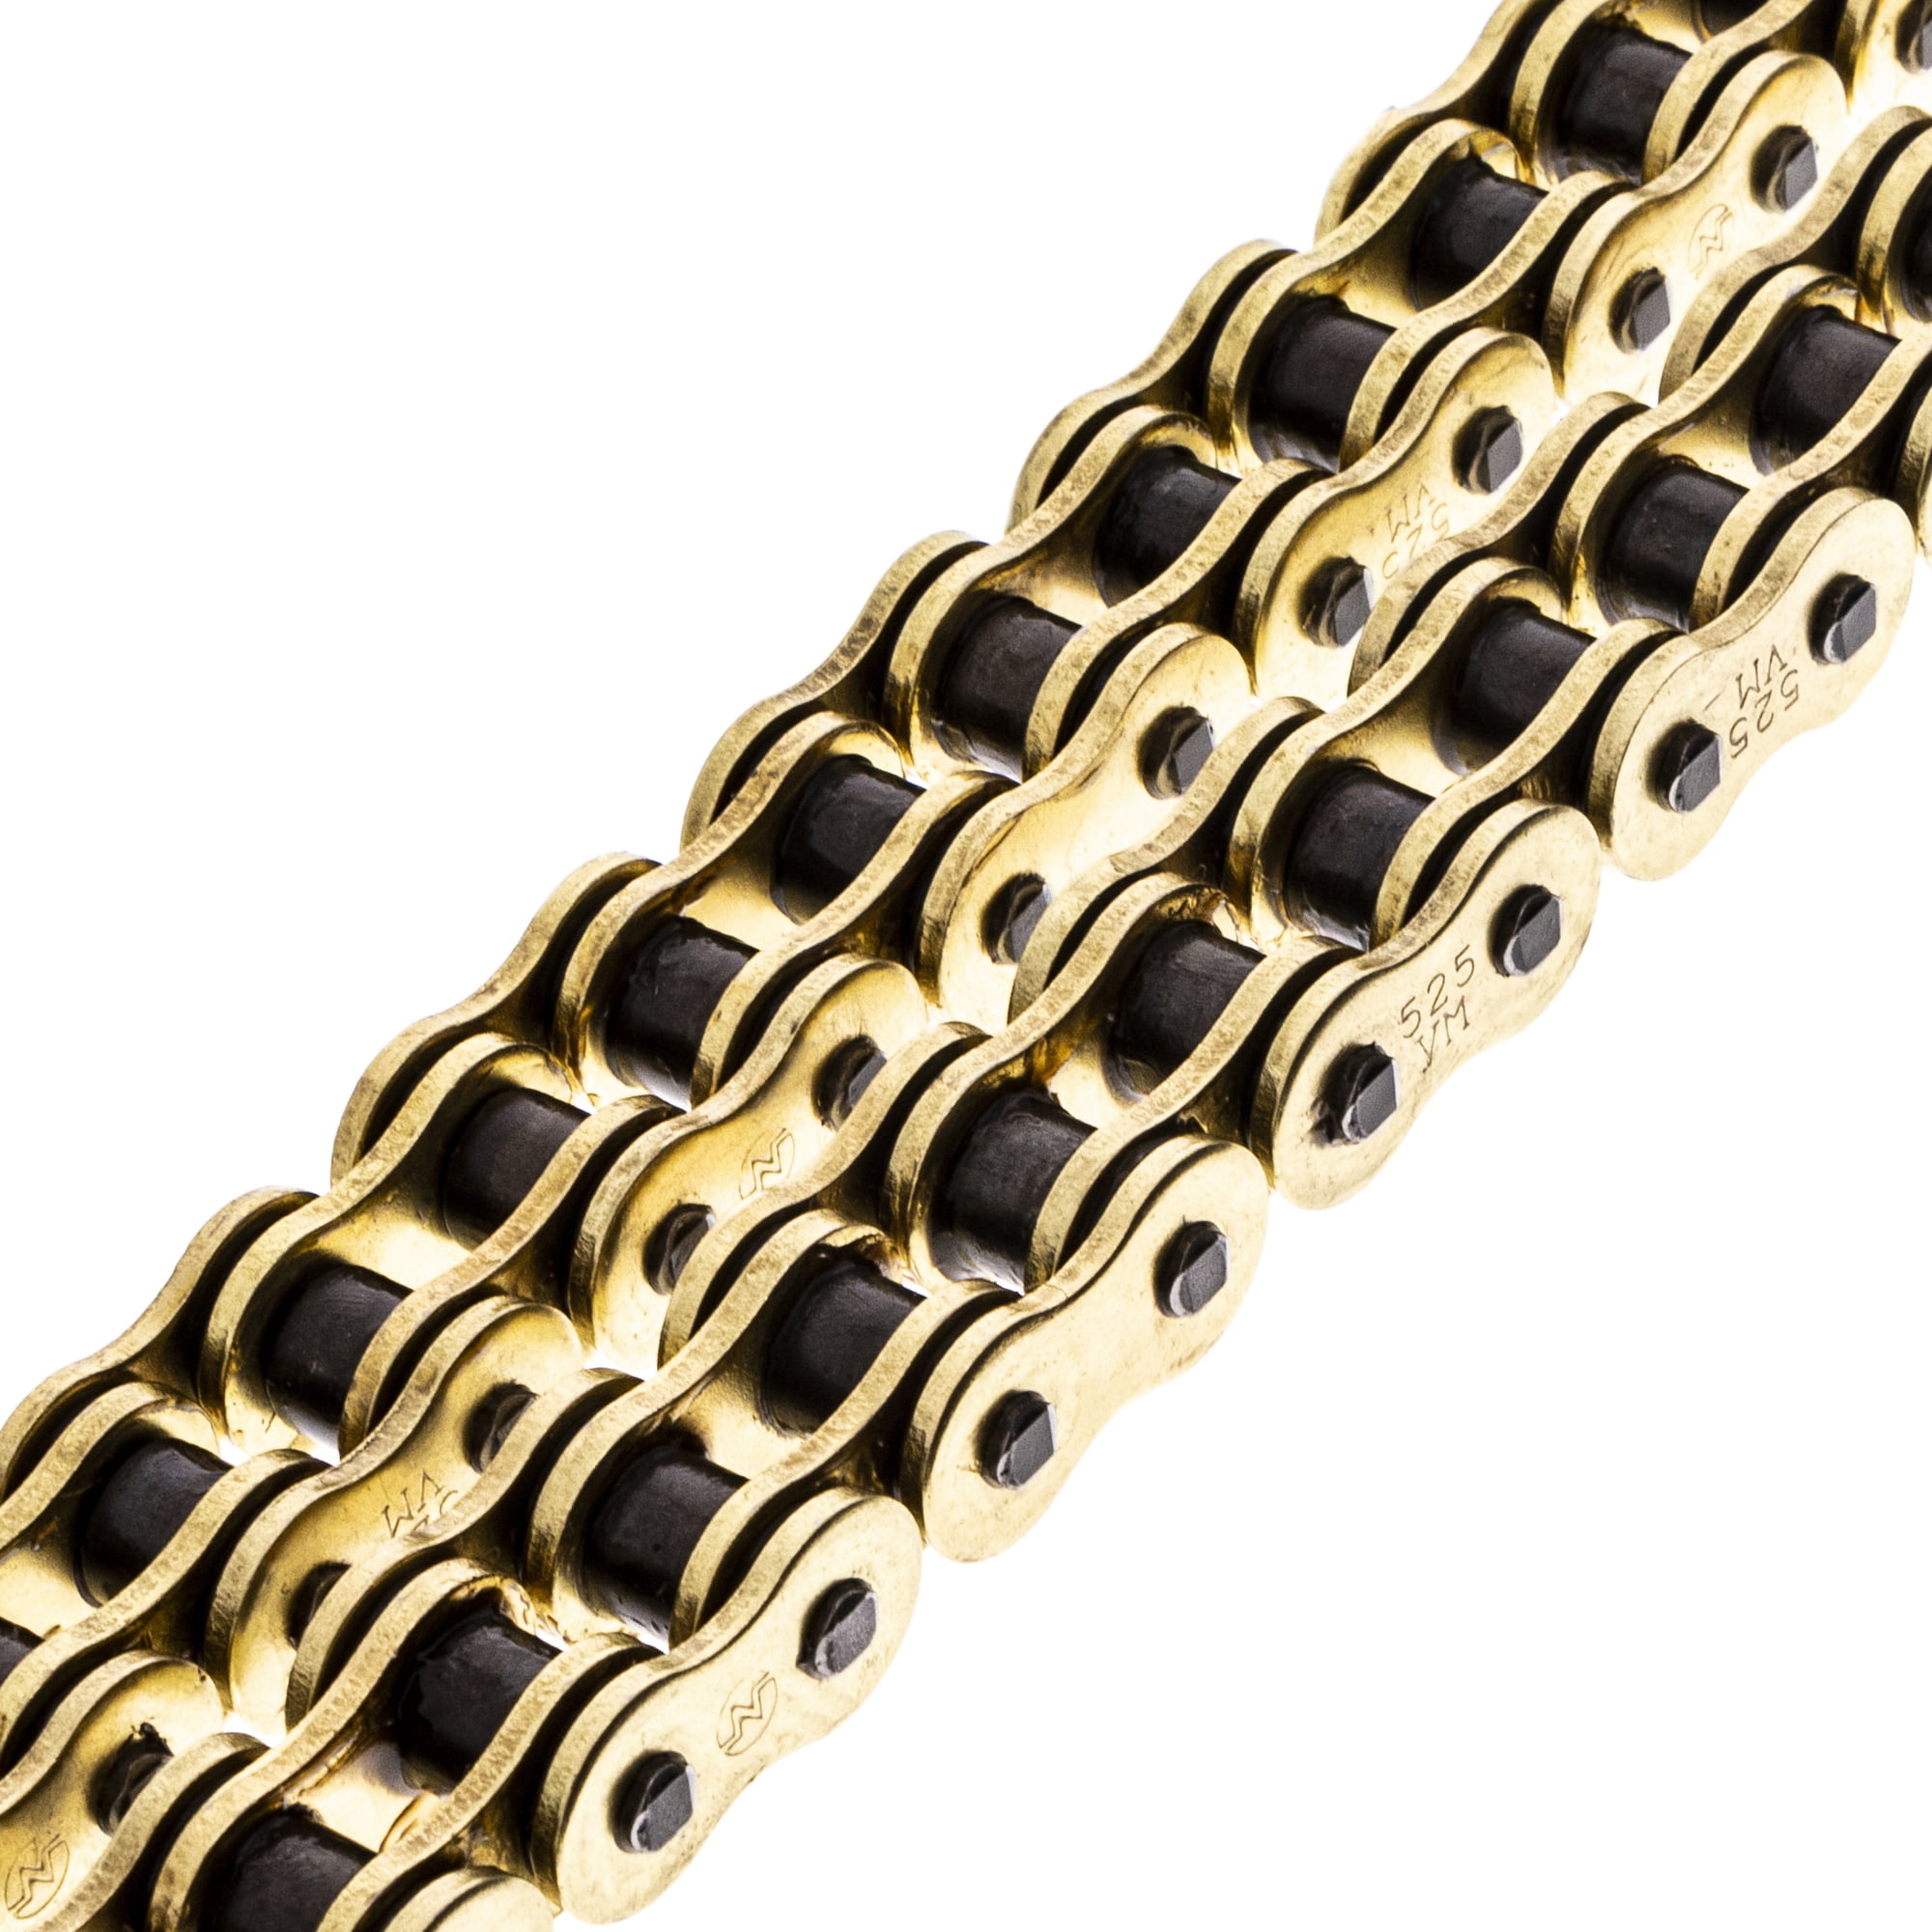 D.I.D 520VO Professional O-Ring Chain - 520